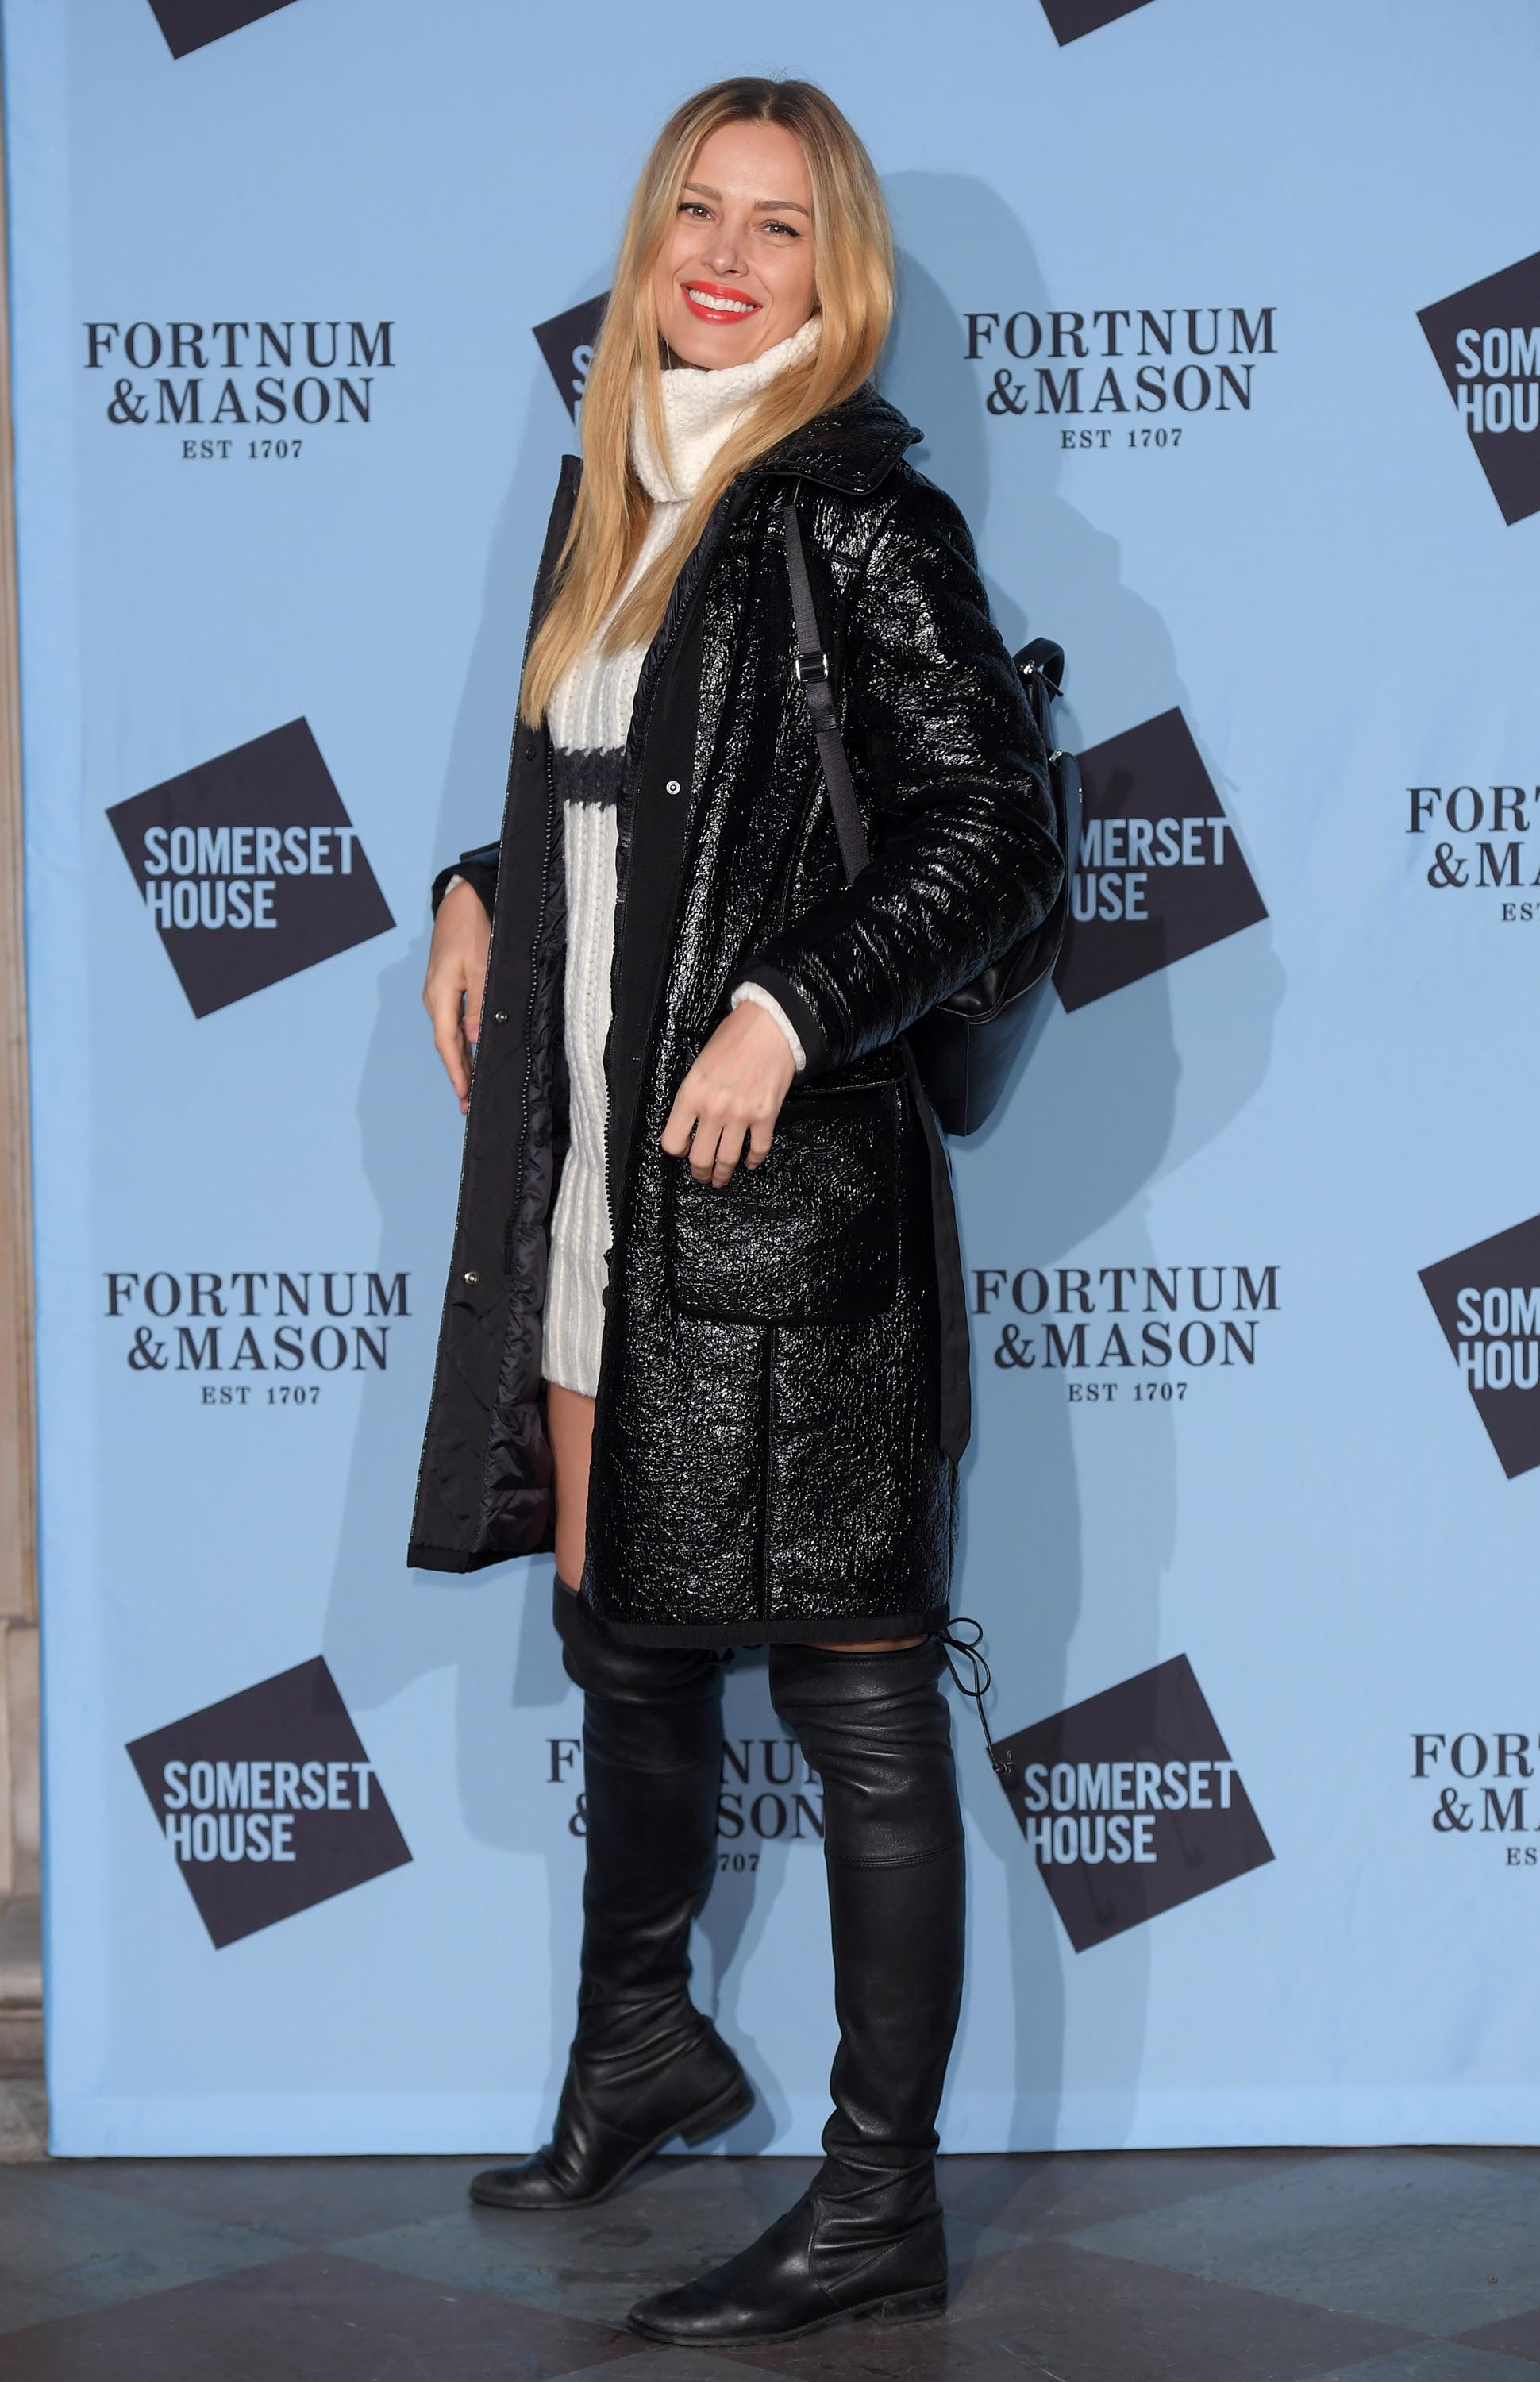 Petra Nemcova attends the opening party of Skate